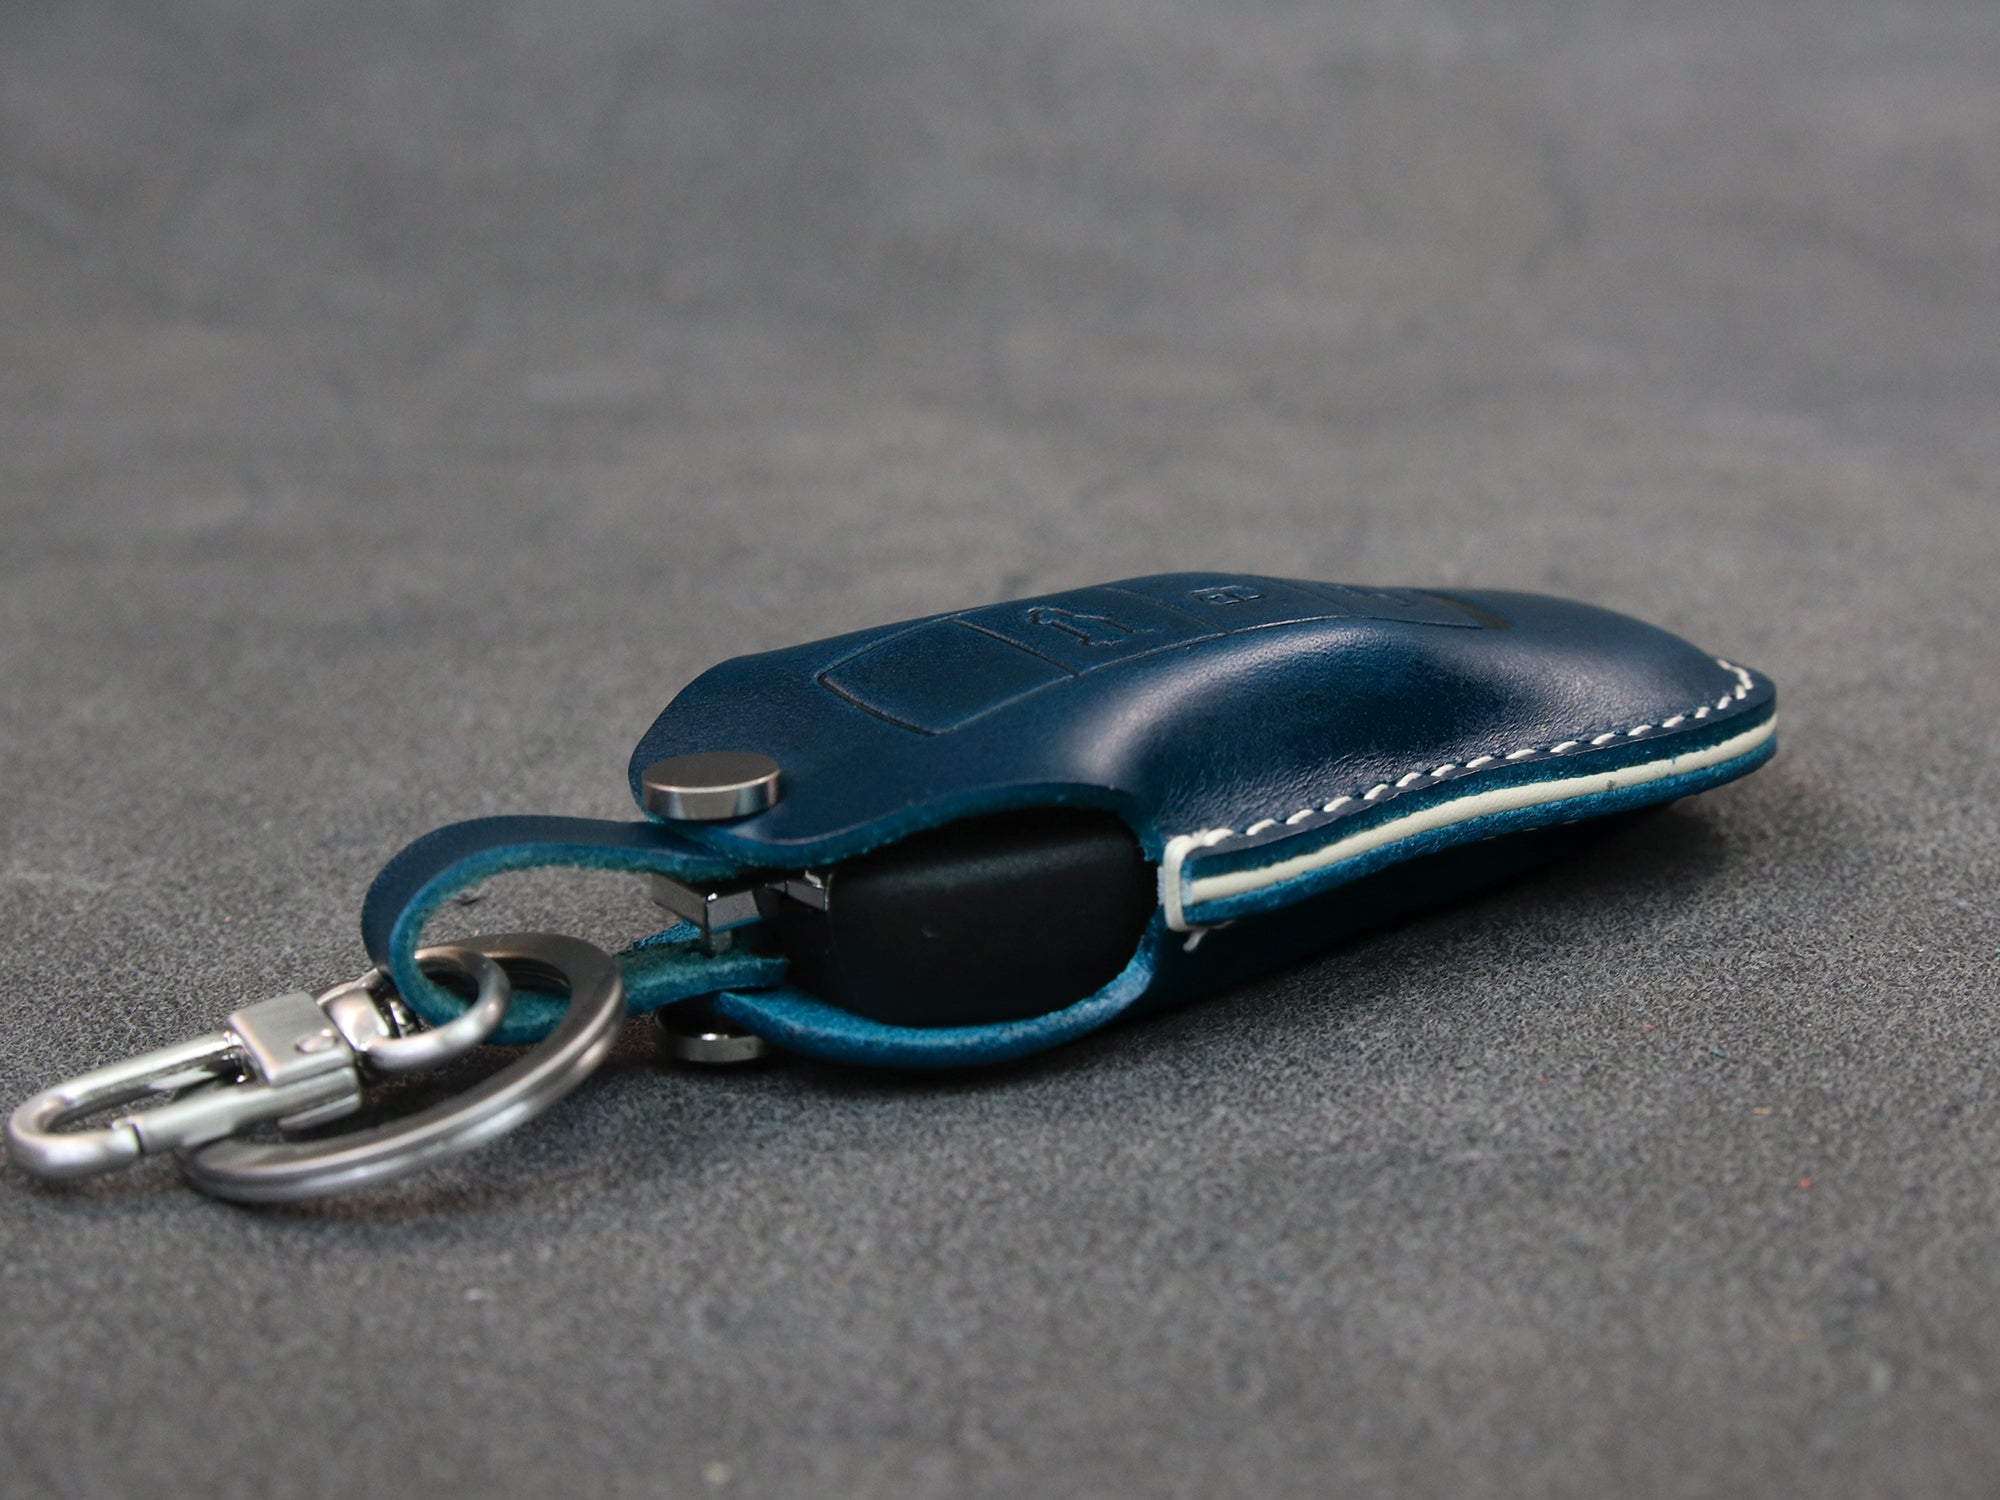 Key pouch in leather - 718/911/Cayenne/Panamera/Macan